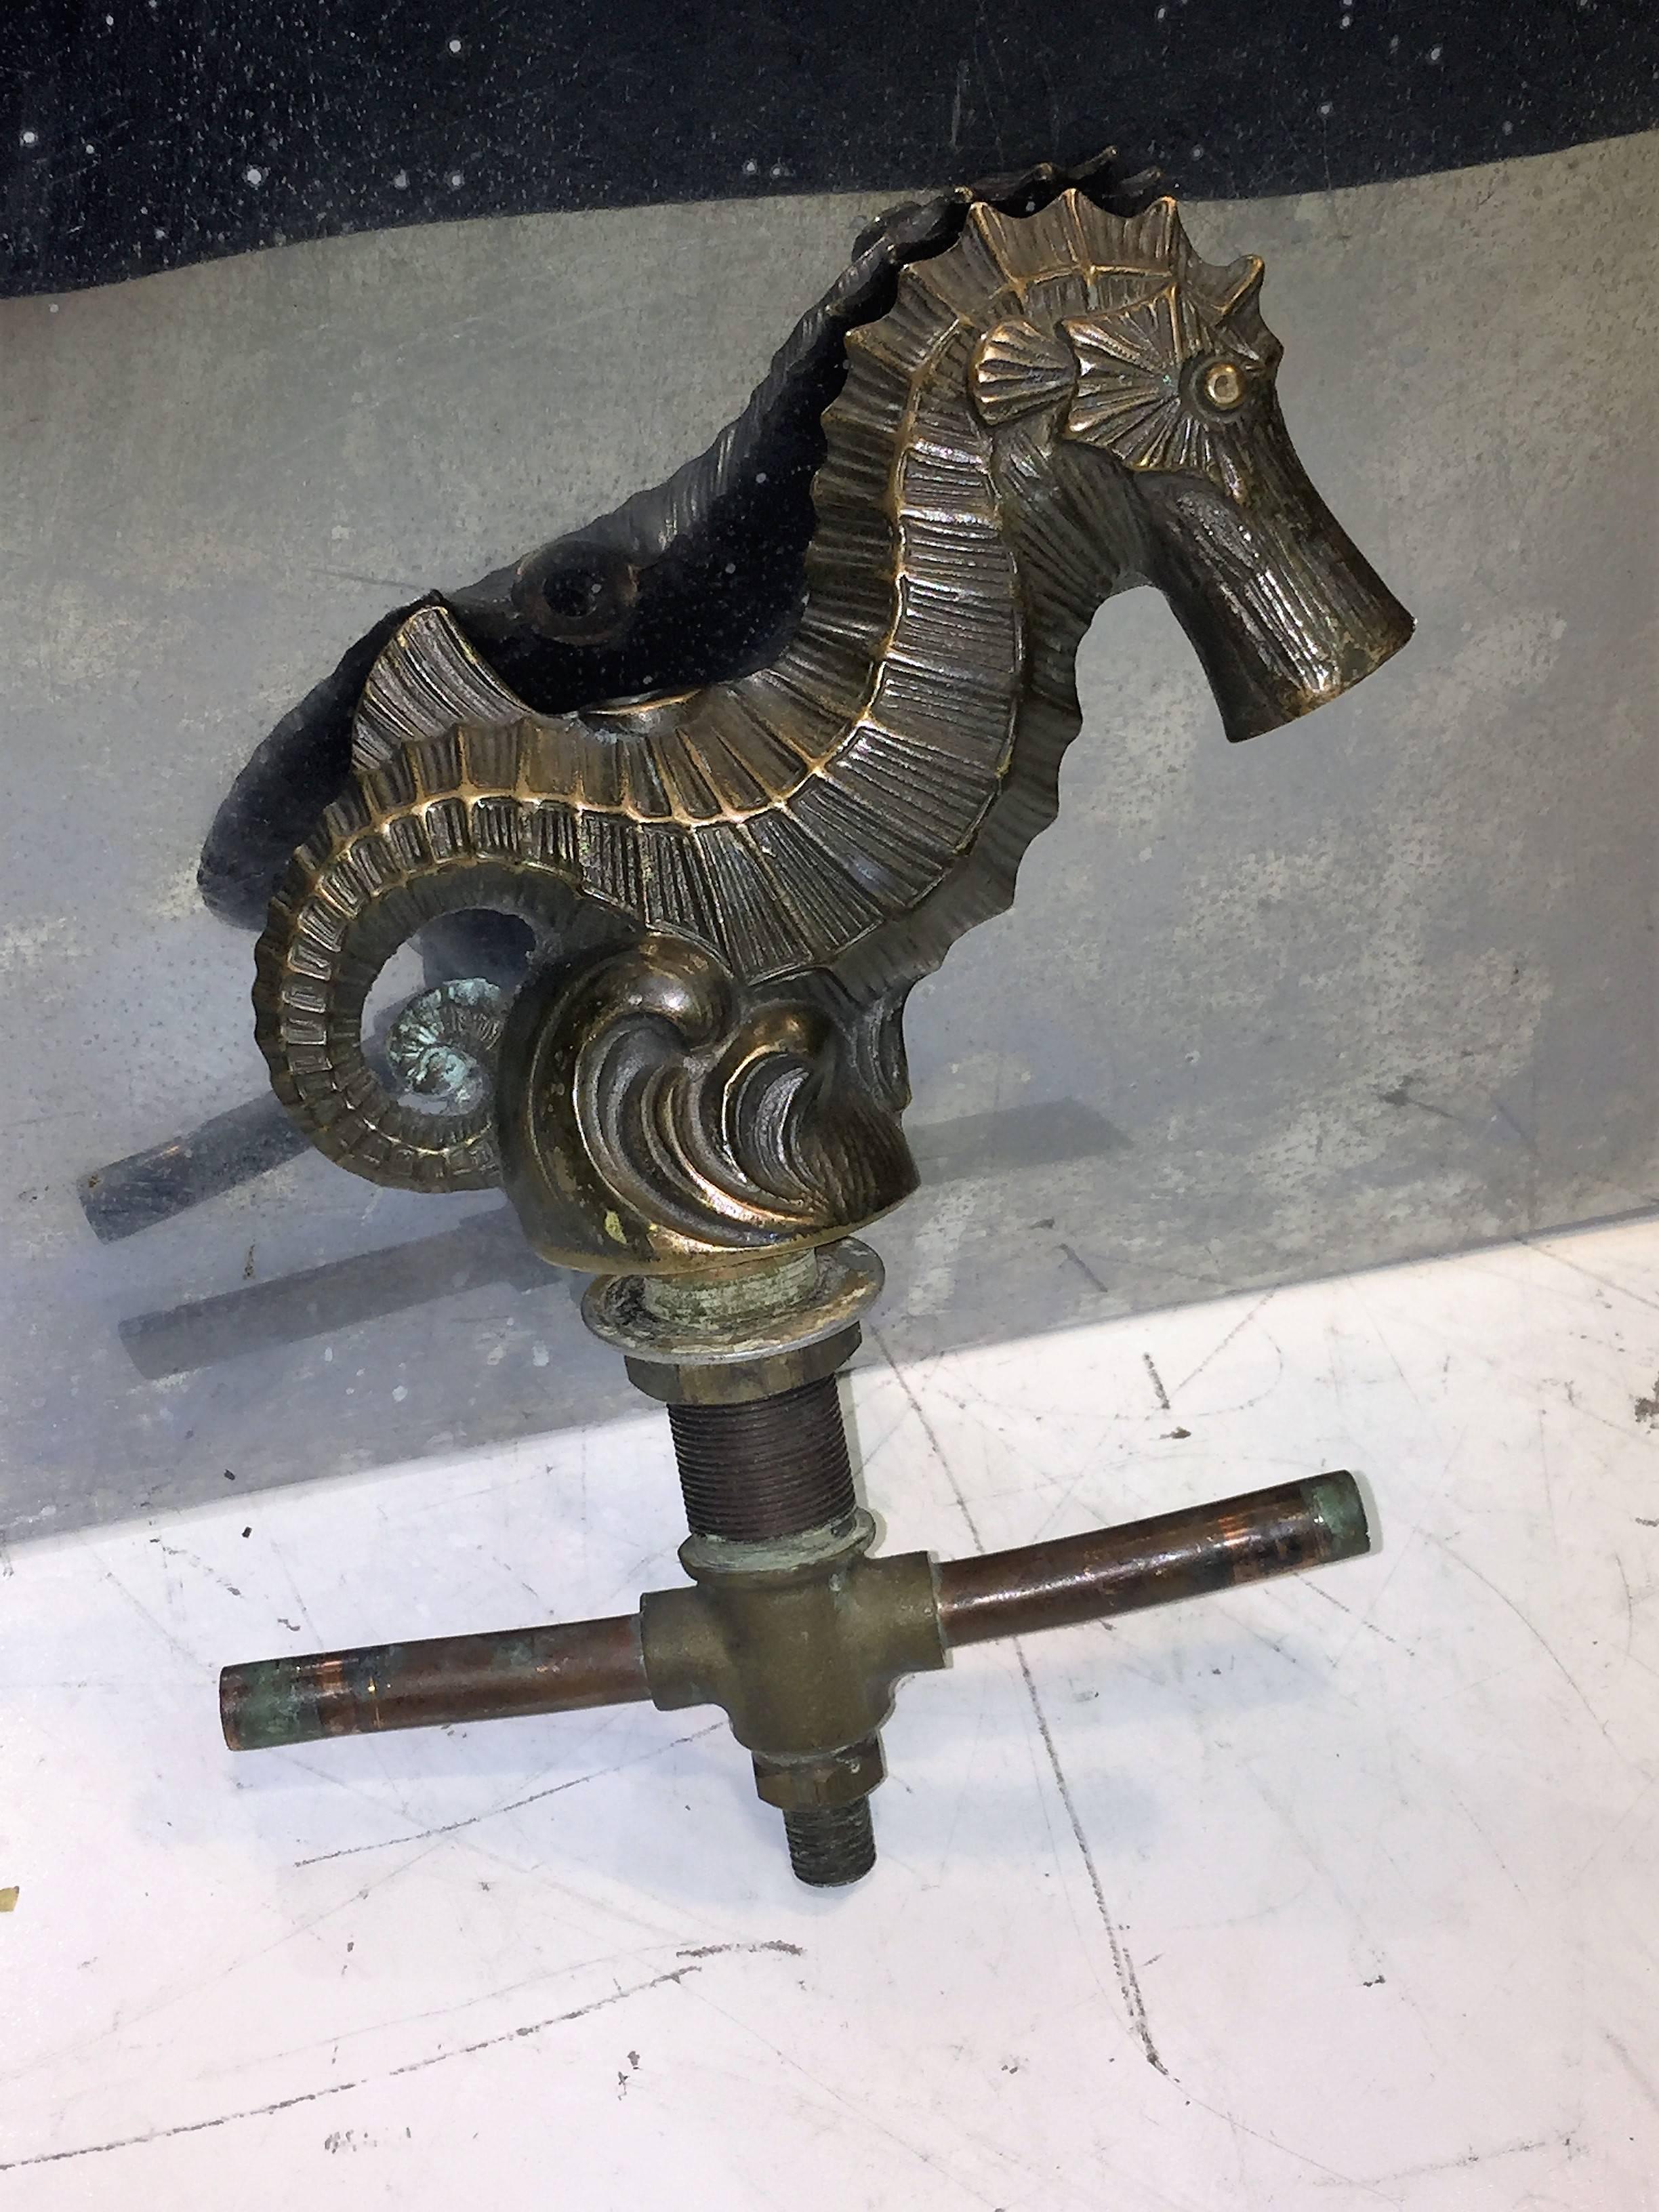 Substantial 1930s seahorse faucet and handles vanity sink set. The large seahorse is the main water faucet and the smaller pair is the handles. The hexagonal base is cast with a turtle, dolphin, crab, seahorse, scallop and starfish. Also has the